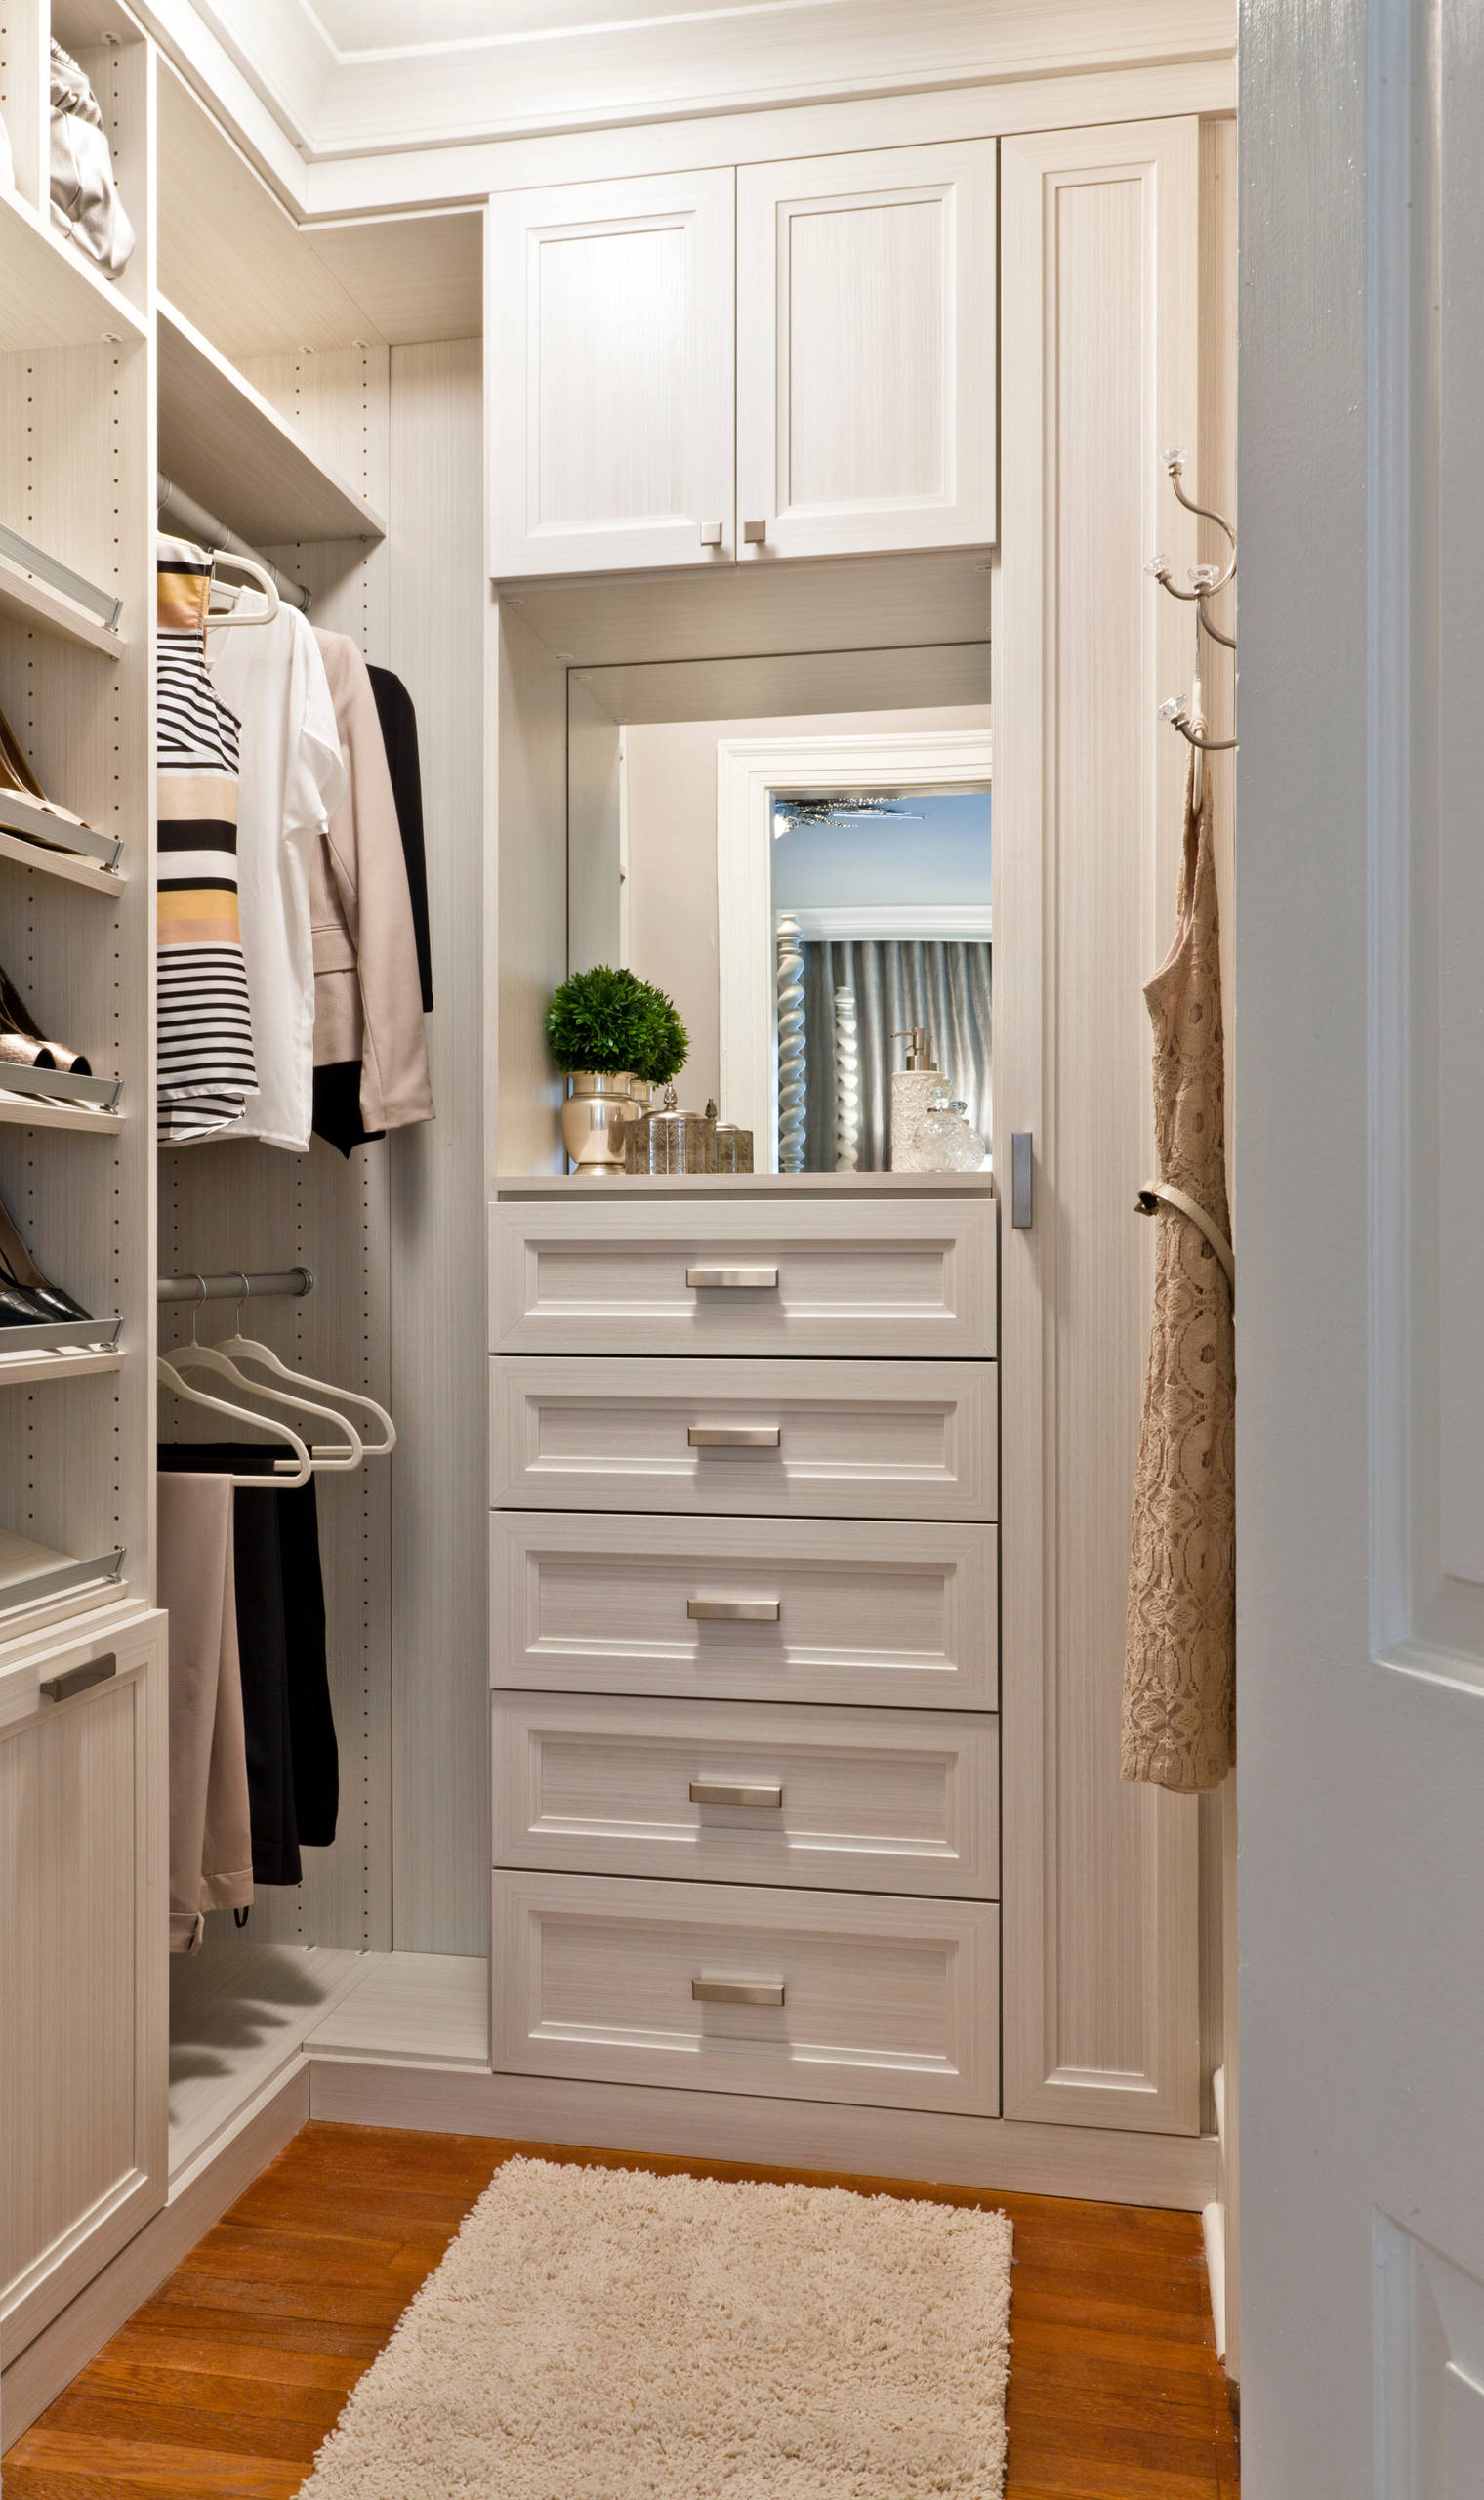 75 Beautiful Small Walk In Closet Pictures Ideas April 2021 Houzz